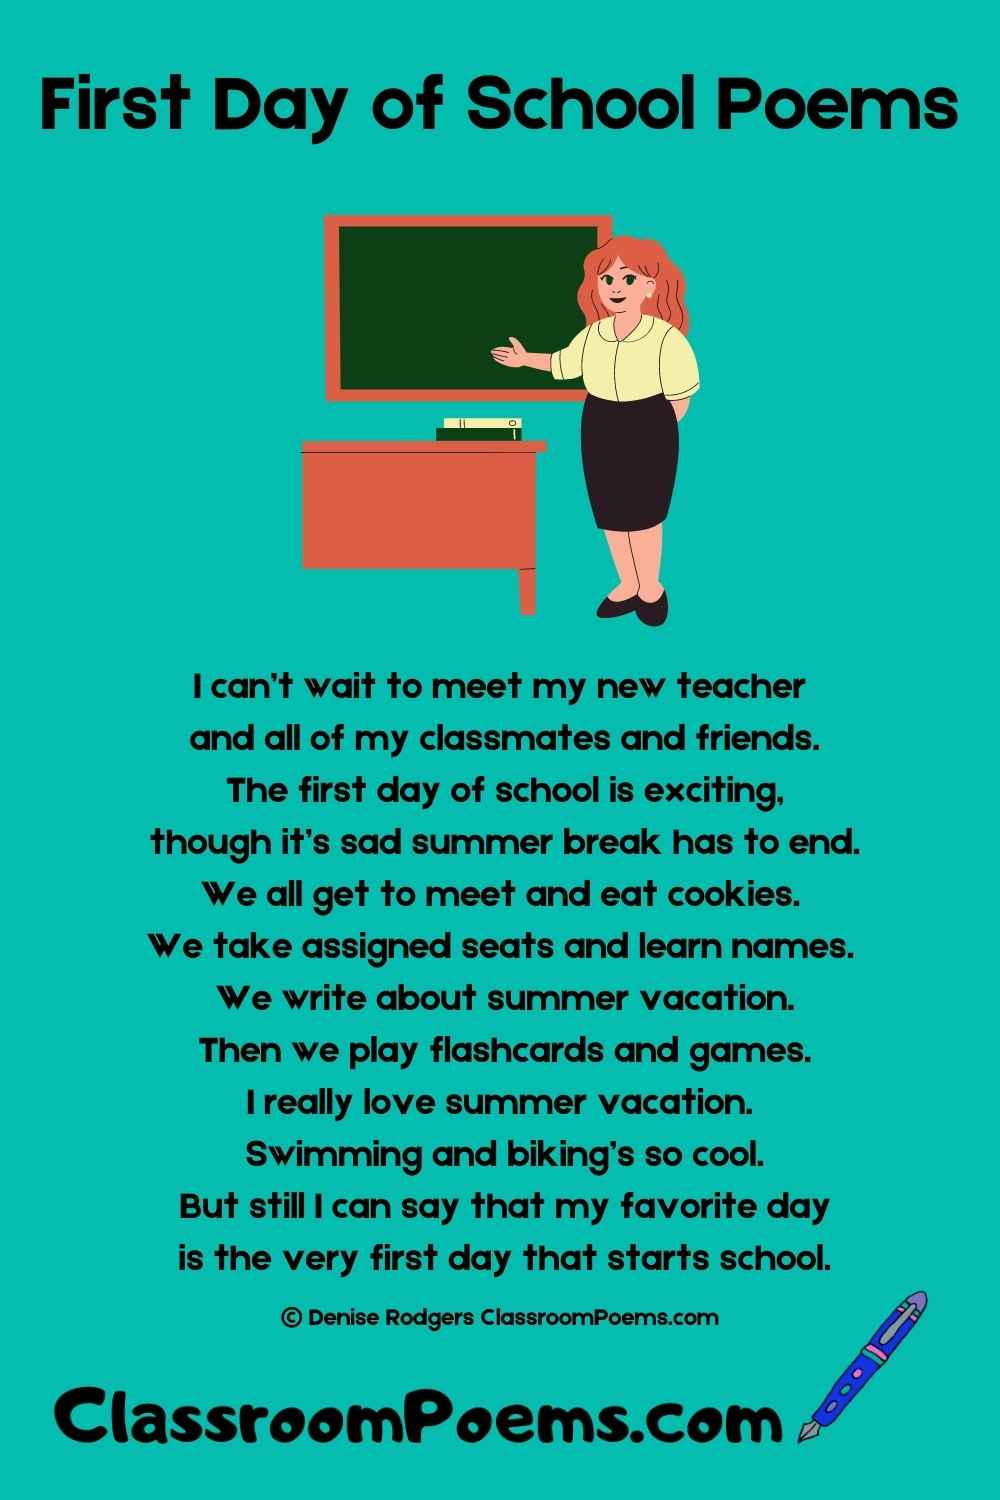 First Day of School Poems by Denise Rodgers on ClassroomPoems.com.